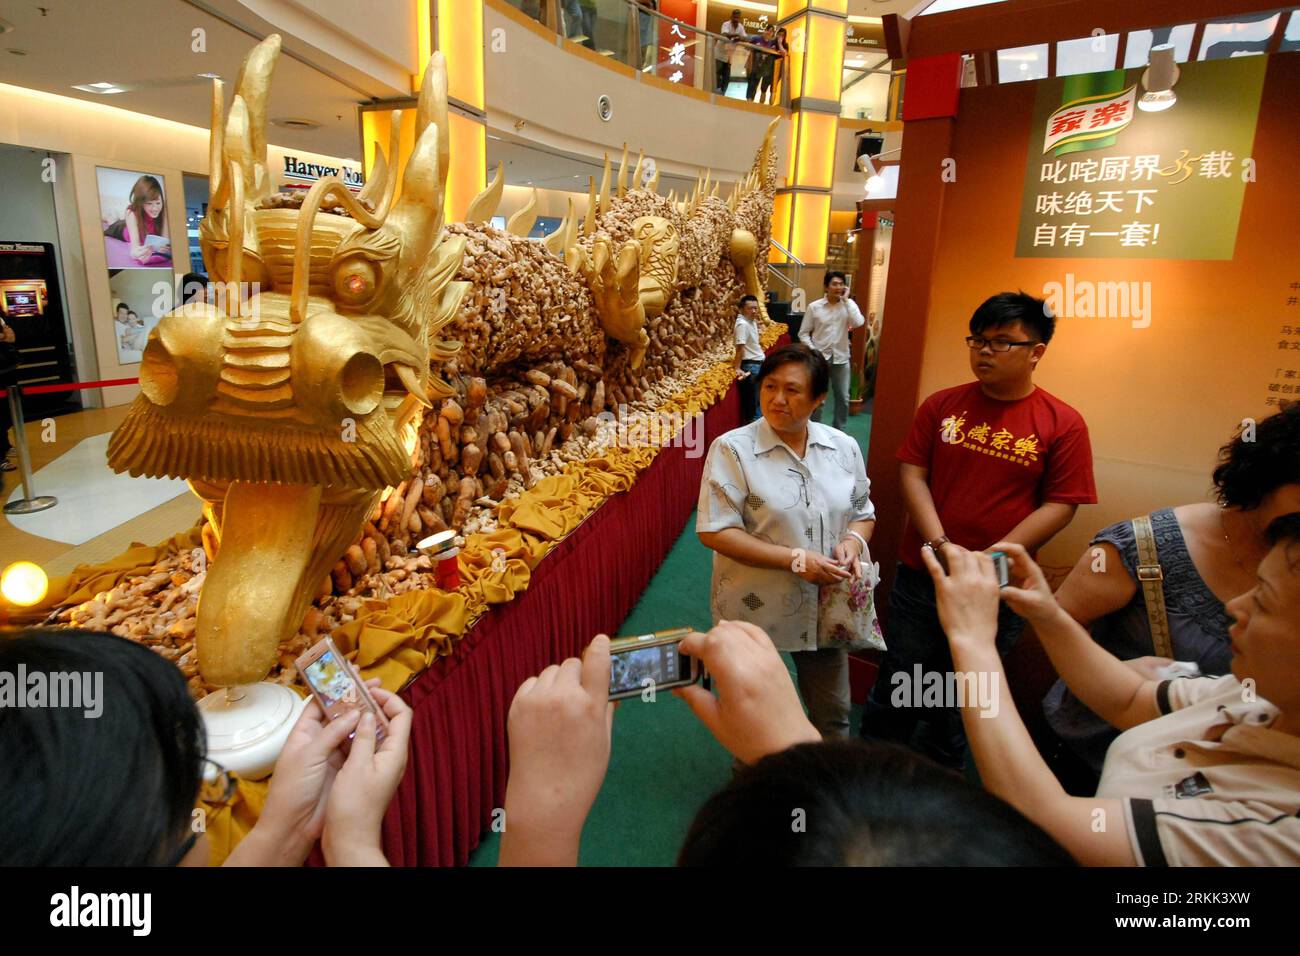 Bildnummer: 56195774  Datum: 19.10.2011  Copyright: imago/Xinhua (111019) -- KUALA LUMPUR, Oct. 19, 2011 (Xinhua) -- Tourists take pictures of a huge dragon sculpture which is made of ginger and lotus root in a shop in Kuala Lumpur, Malaysia, Oct. 19, 2011. The dragon sculpture measures 10.688 meters long and it took 20 workers in 2 months time in making. (Xinhua/Chong Voon Chung) MALAYSIA-KUALA LUMPUR-DRAGON MADE OF GINGER PUBLICATIONxNOTxINxCHN Gesellschaft Skulptur Figur Drachen Ingwer Lotoswurzel Kurios xbs x0x 2011 quer premiumd      56195774 Date 19 10 2011 Copyright Imago XINHUA  Kuala Stock Photo